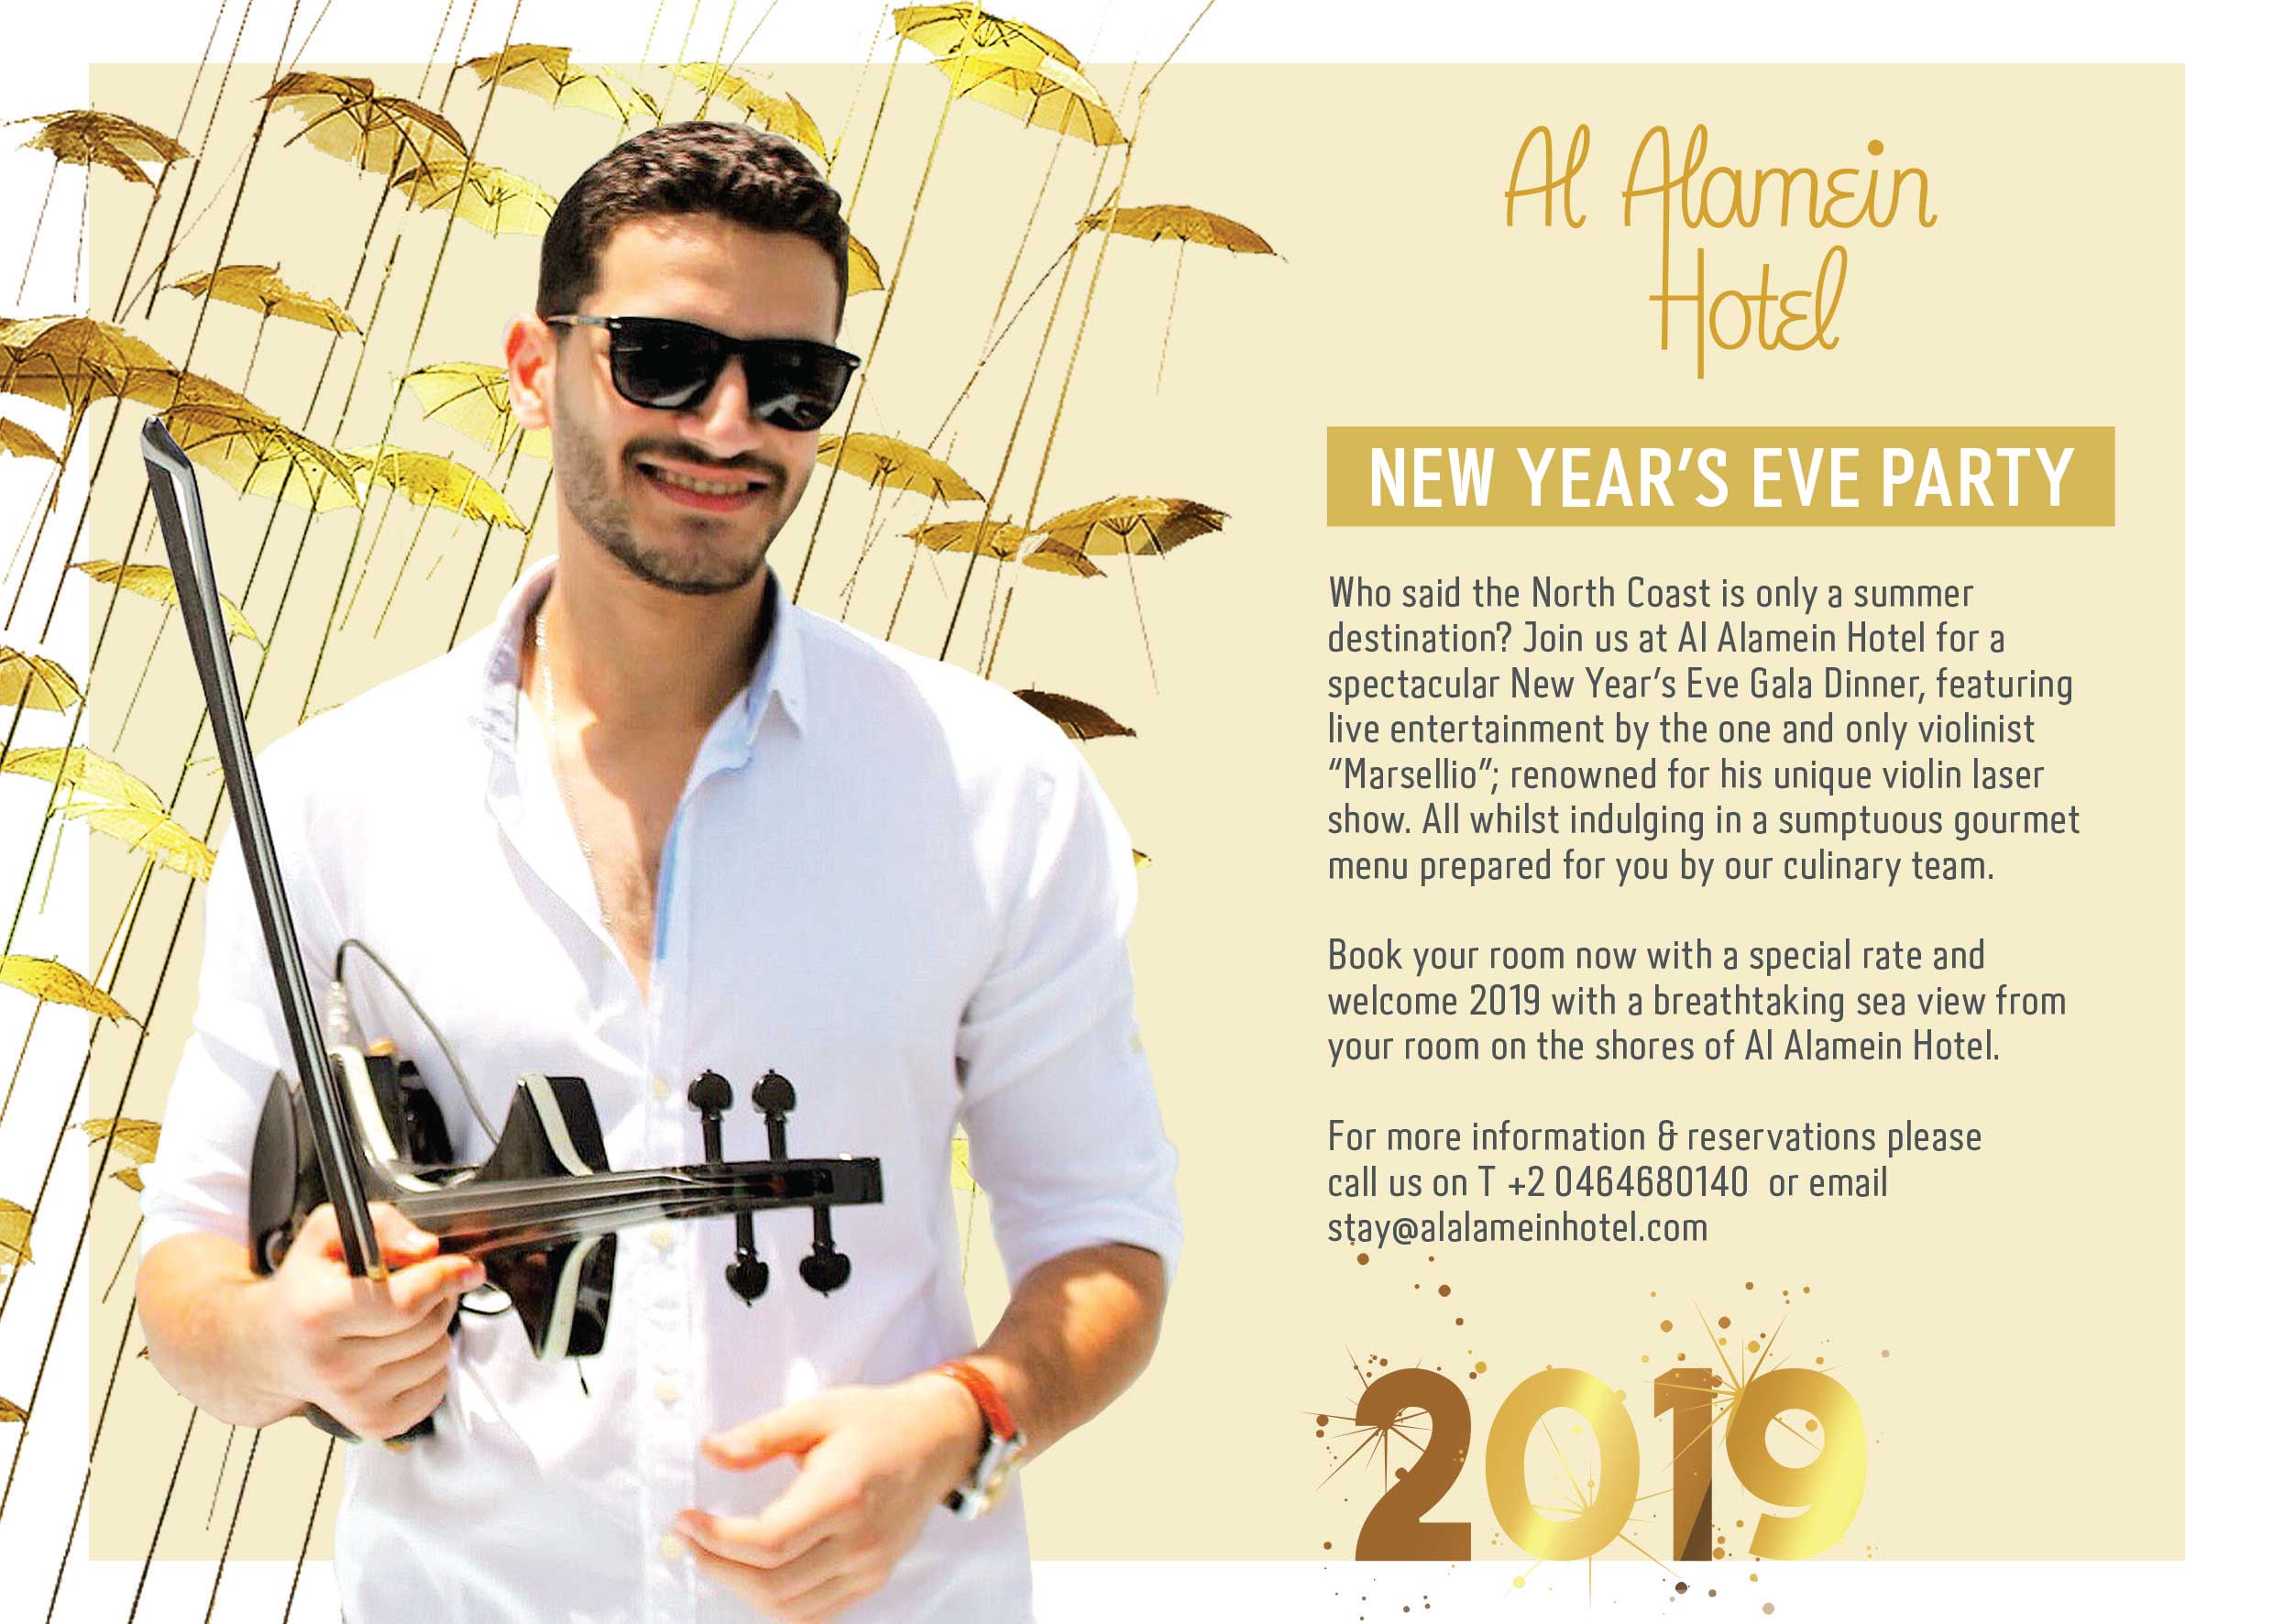 Things To Do and Places To Go On New Year's Eve!